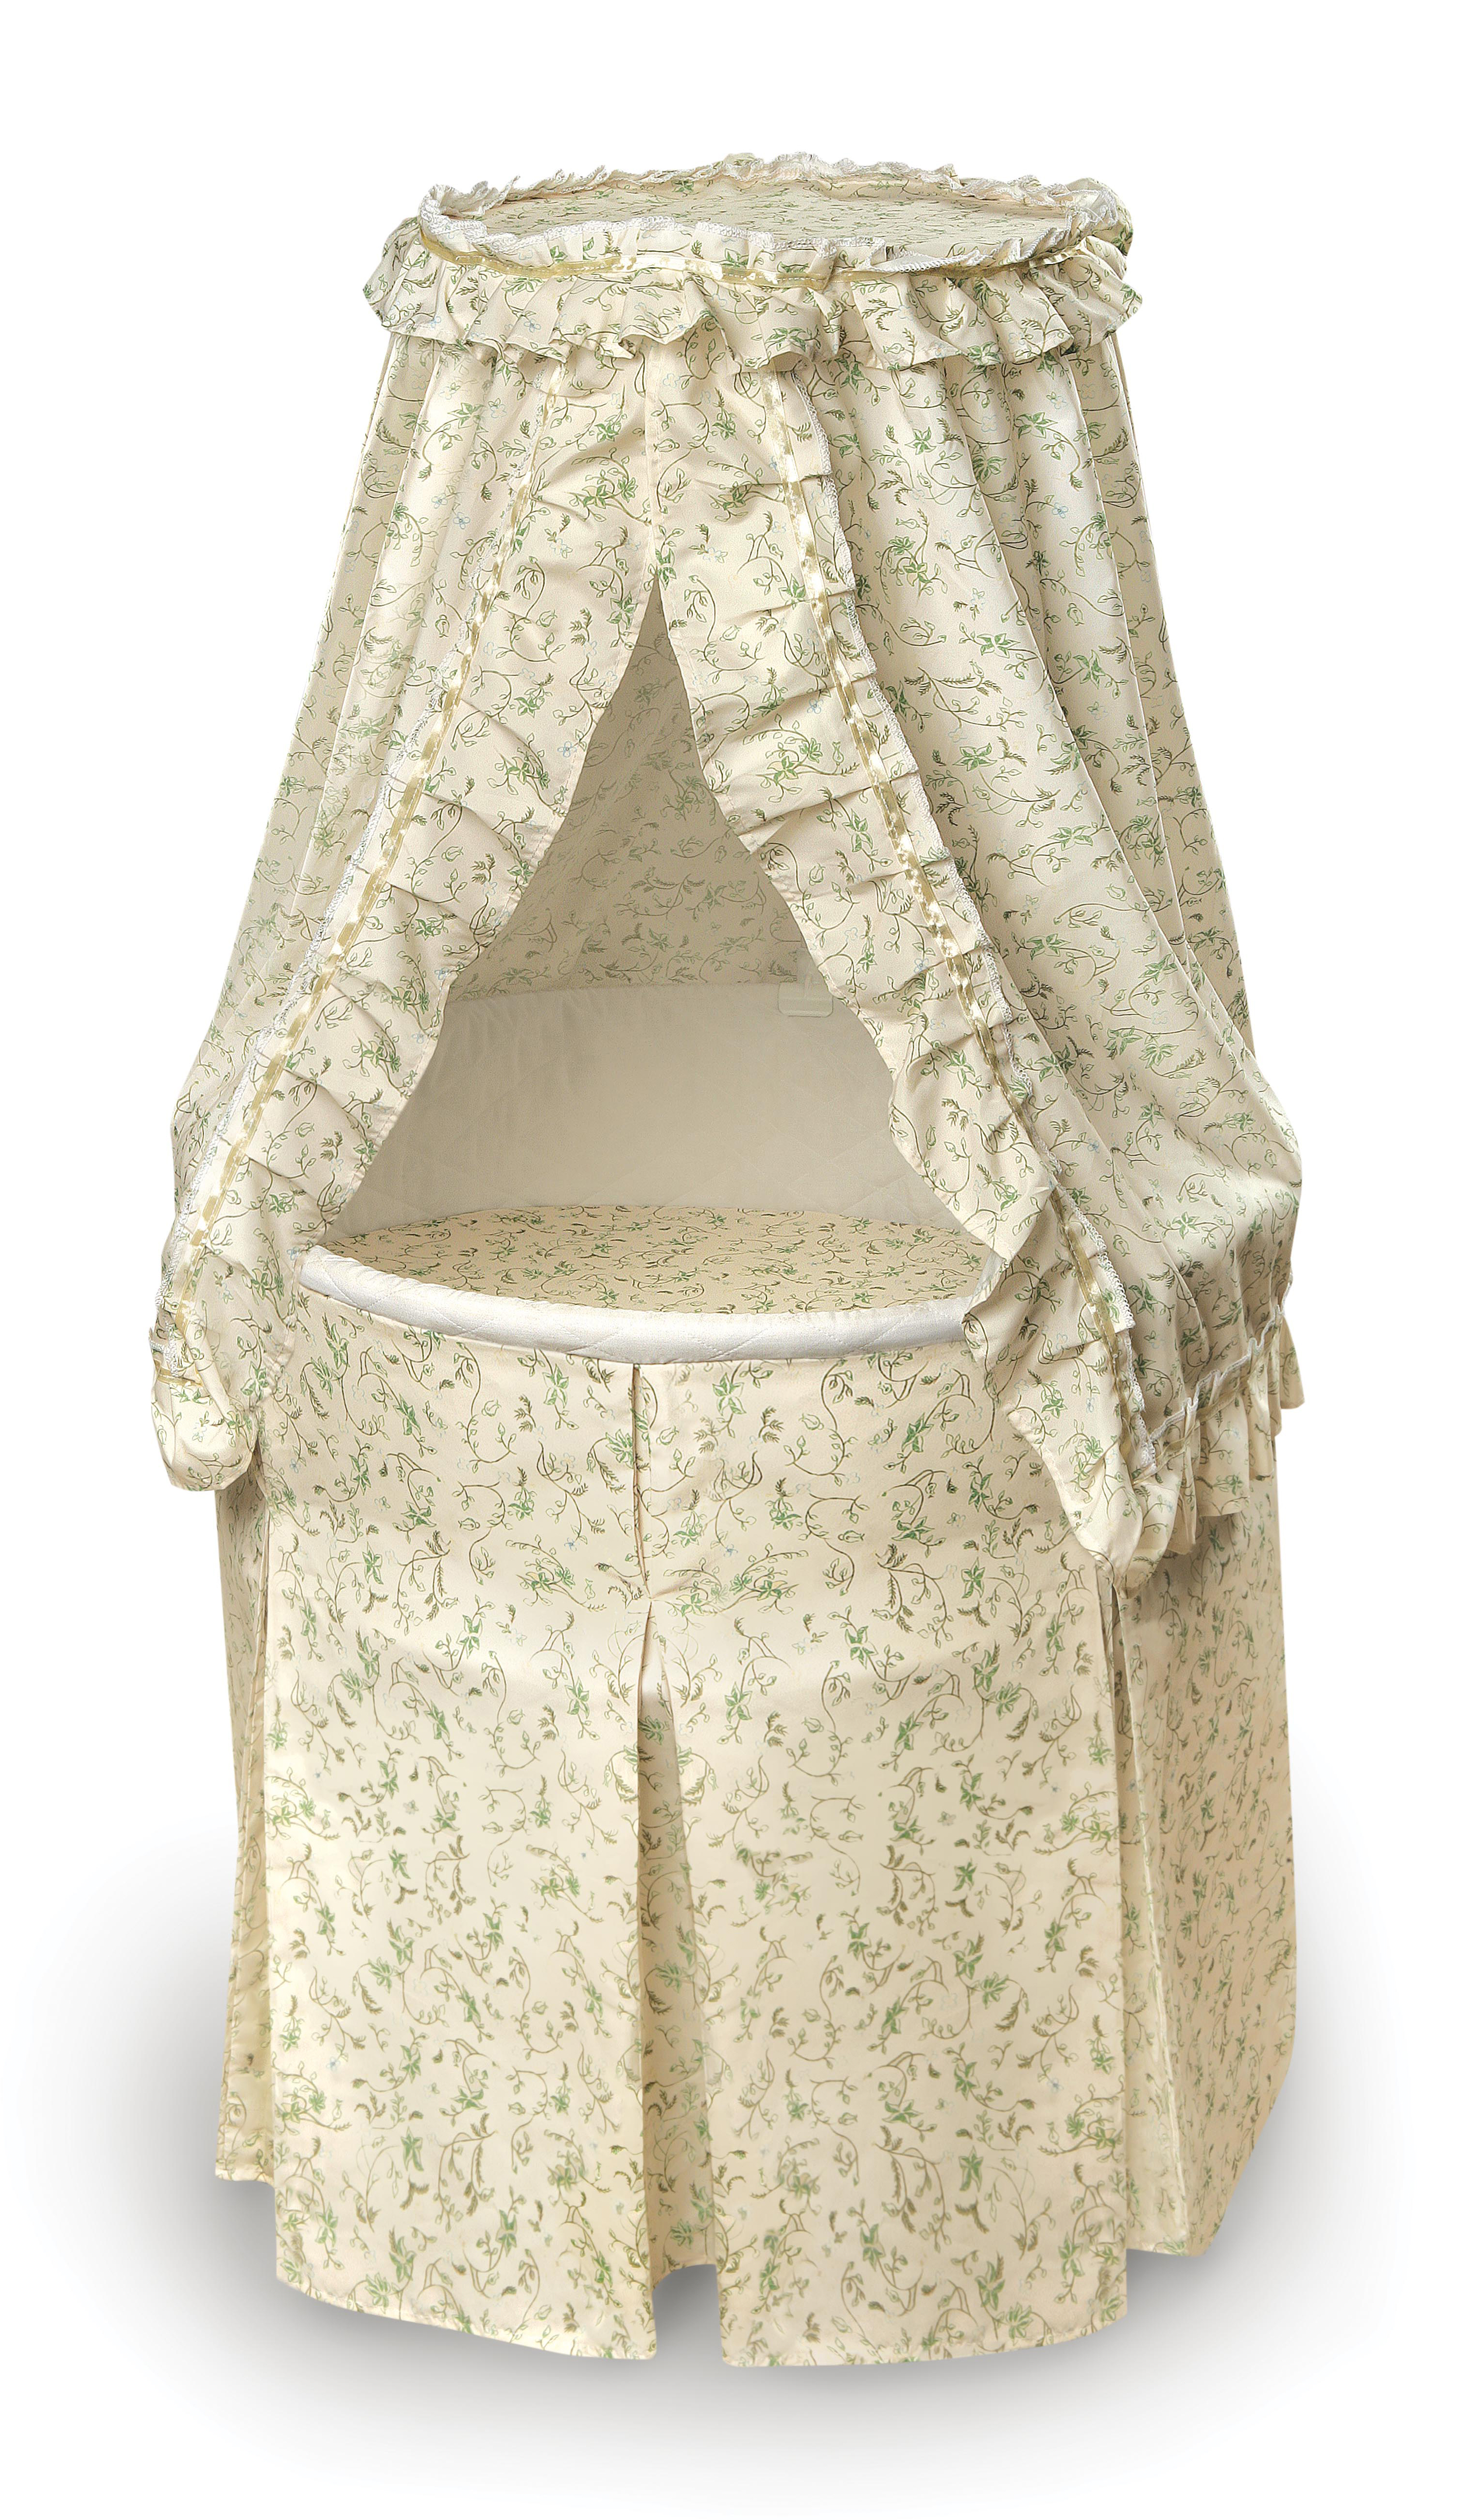 Empress Round Baby Bassinet with Canopy - Ecru and Leaf Print Bedding